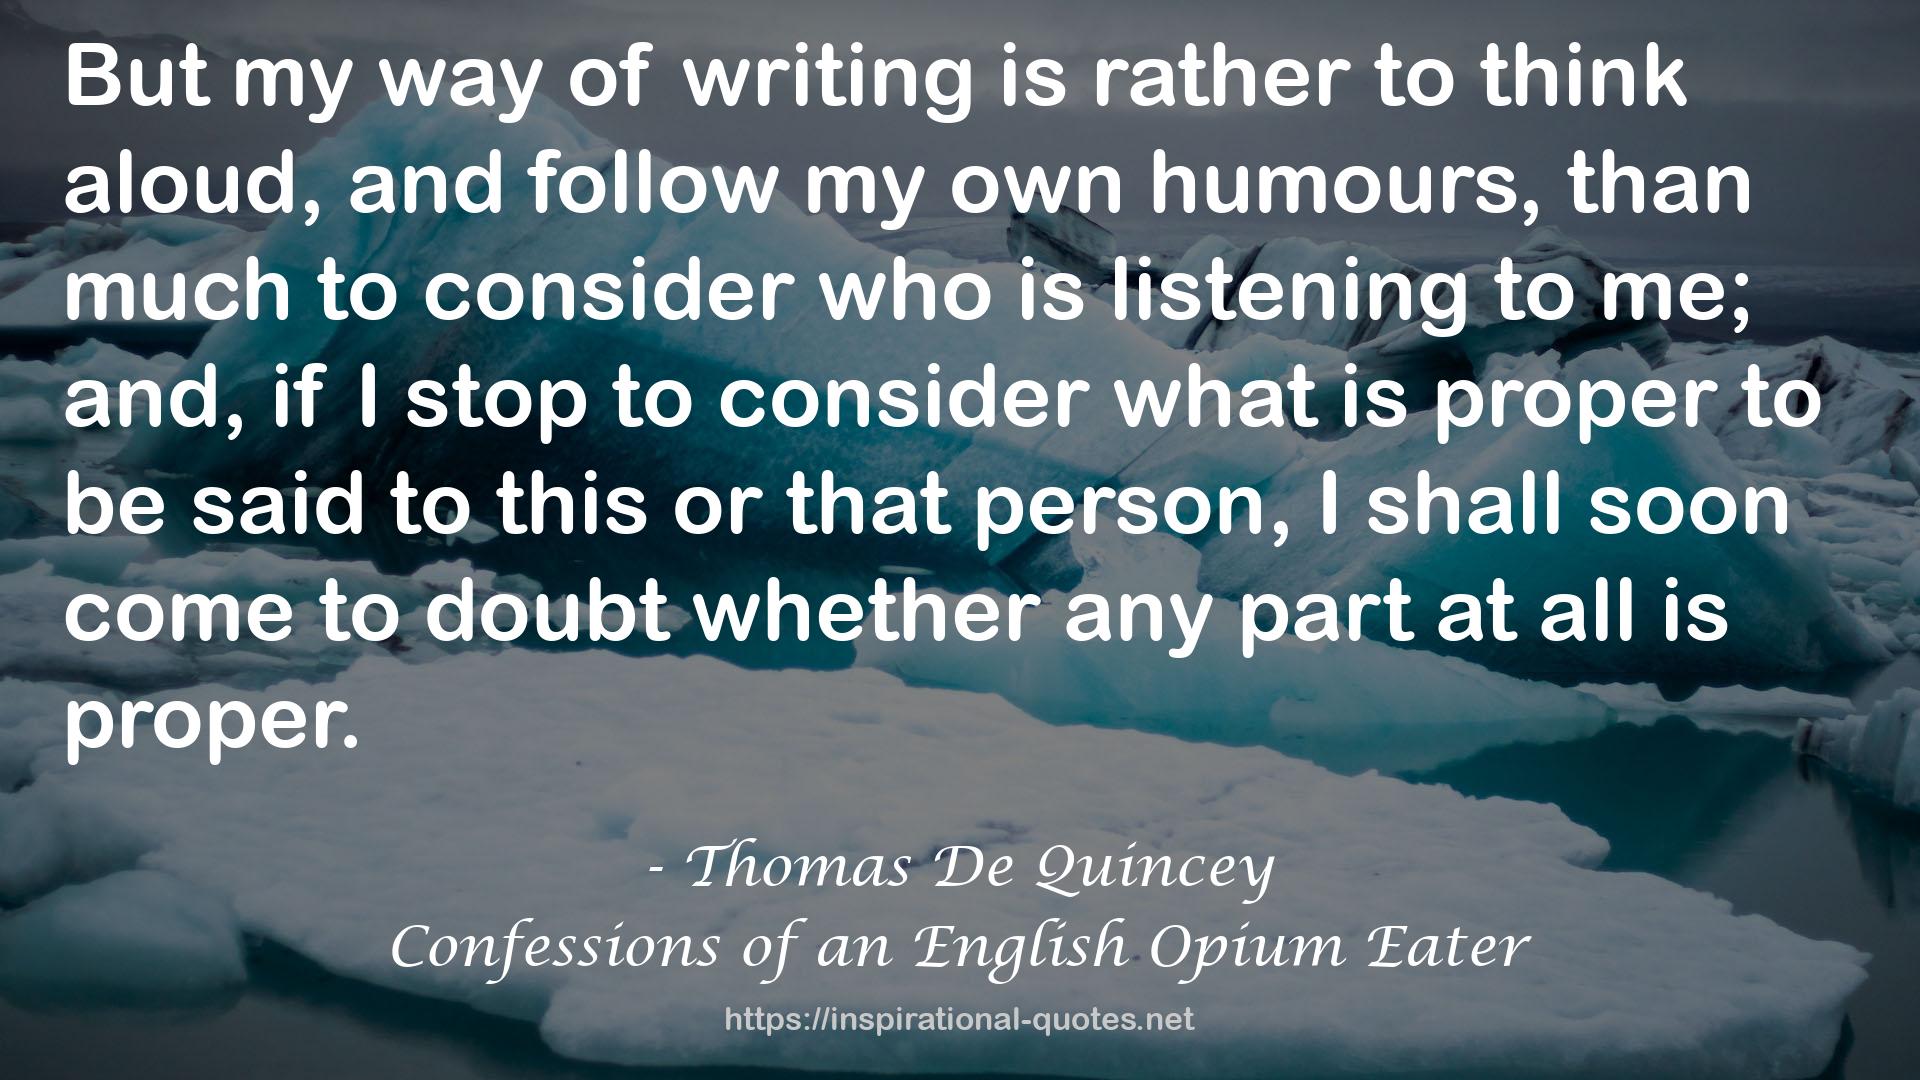 Confessions of an English Opium Eater QUOTES